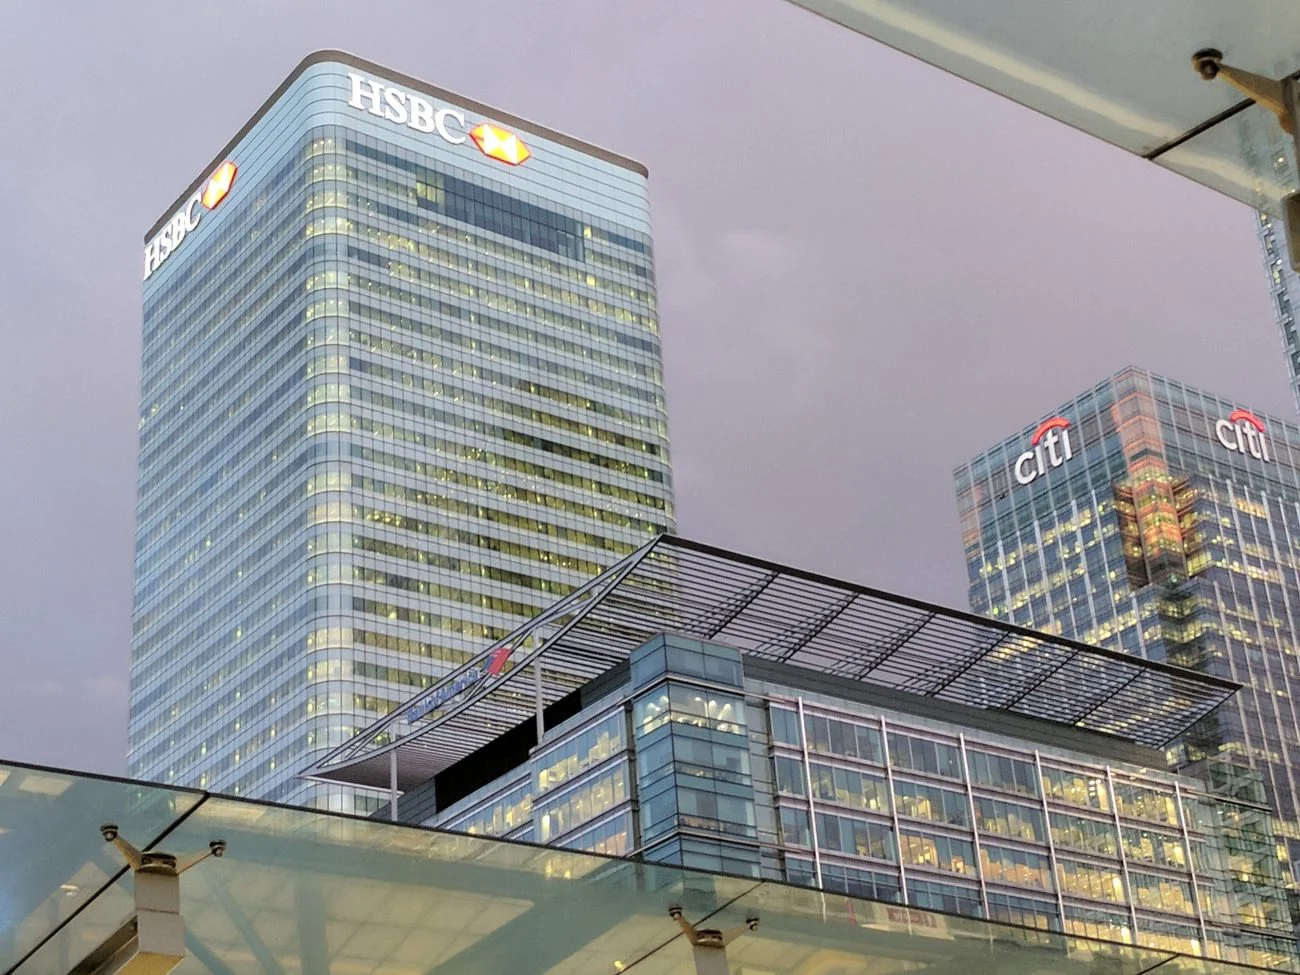 HSBC has extended the cooling-off period for gambling to 72 hours